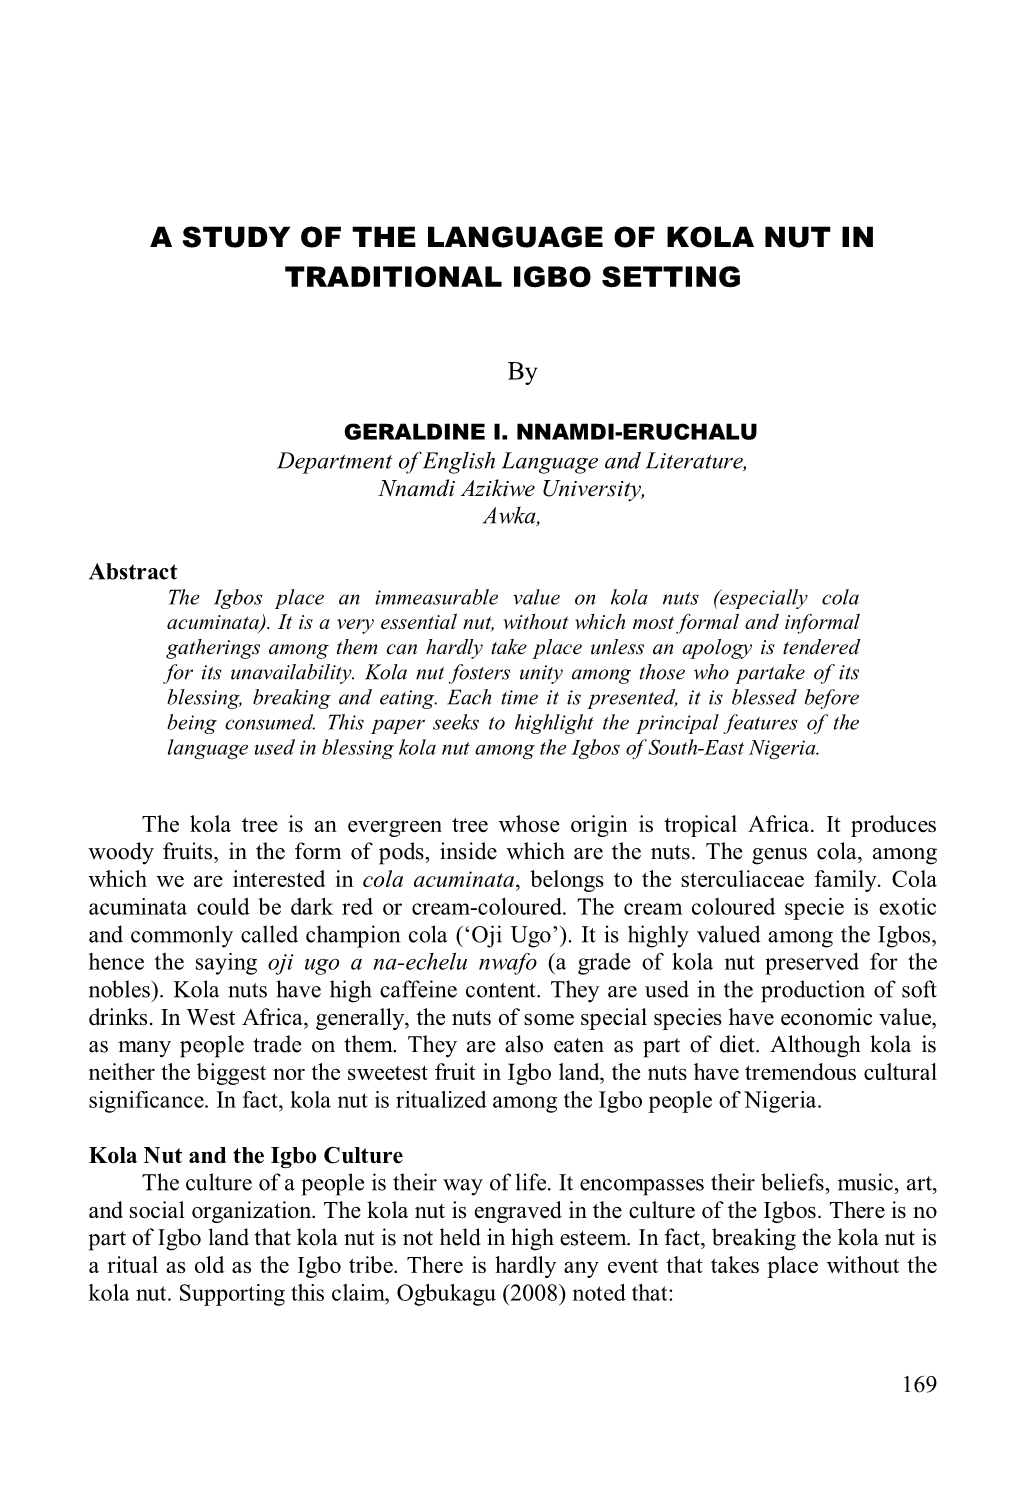 A Study of the Language of Kola Nut in Traditional Igbo Setting